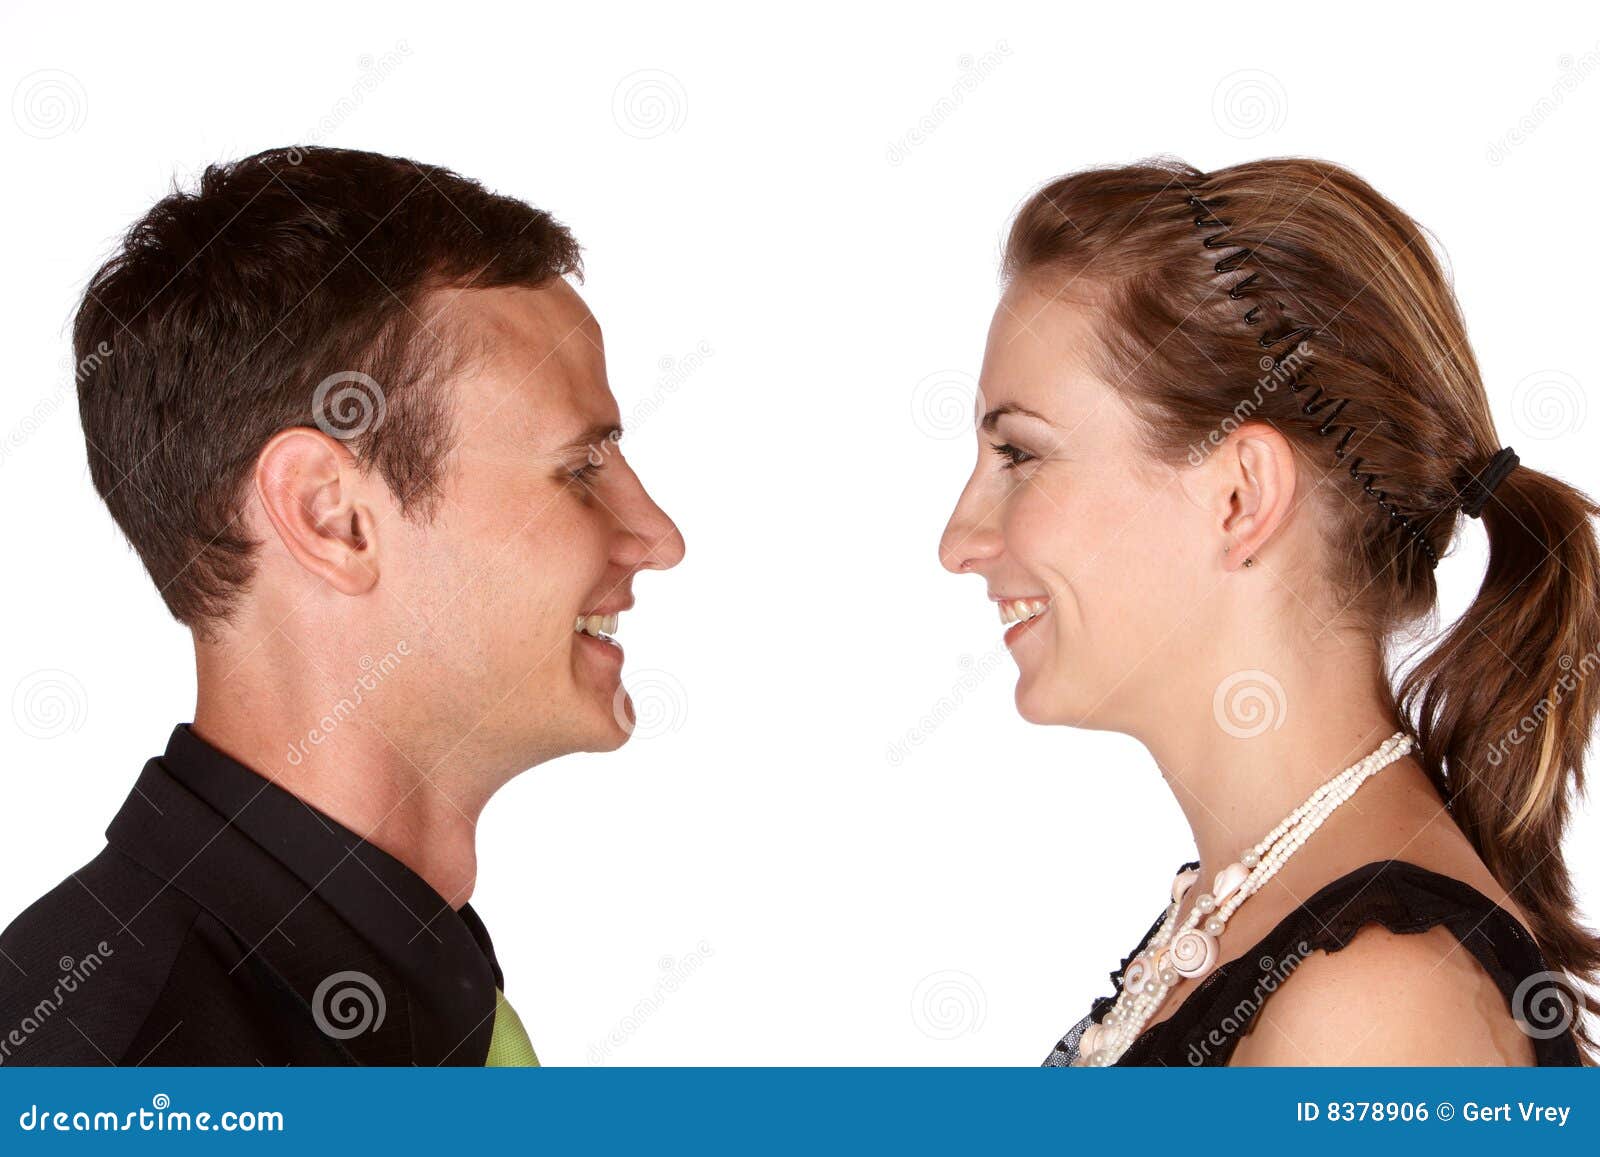 https://thumbs.dreamstime.com/z/facing-each-other-8378906.jpg